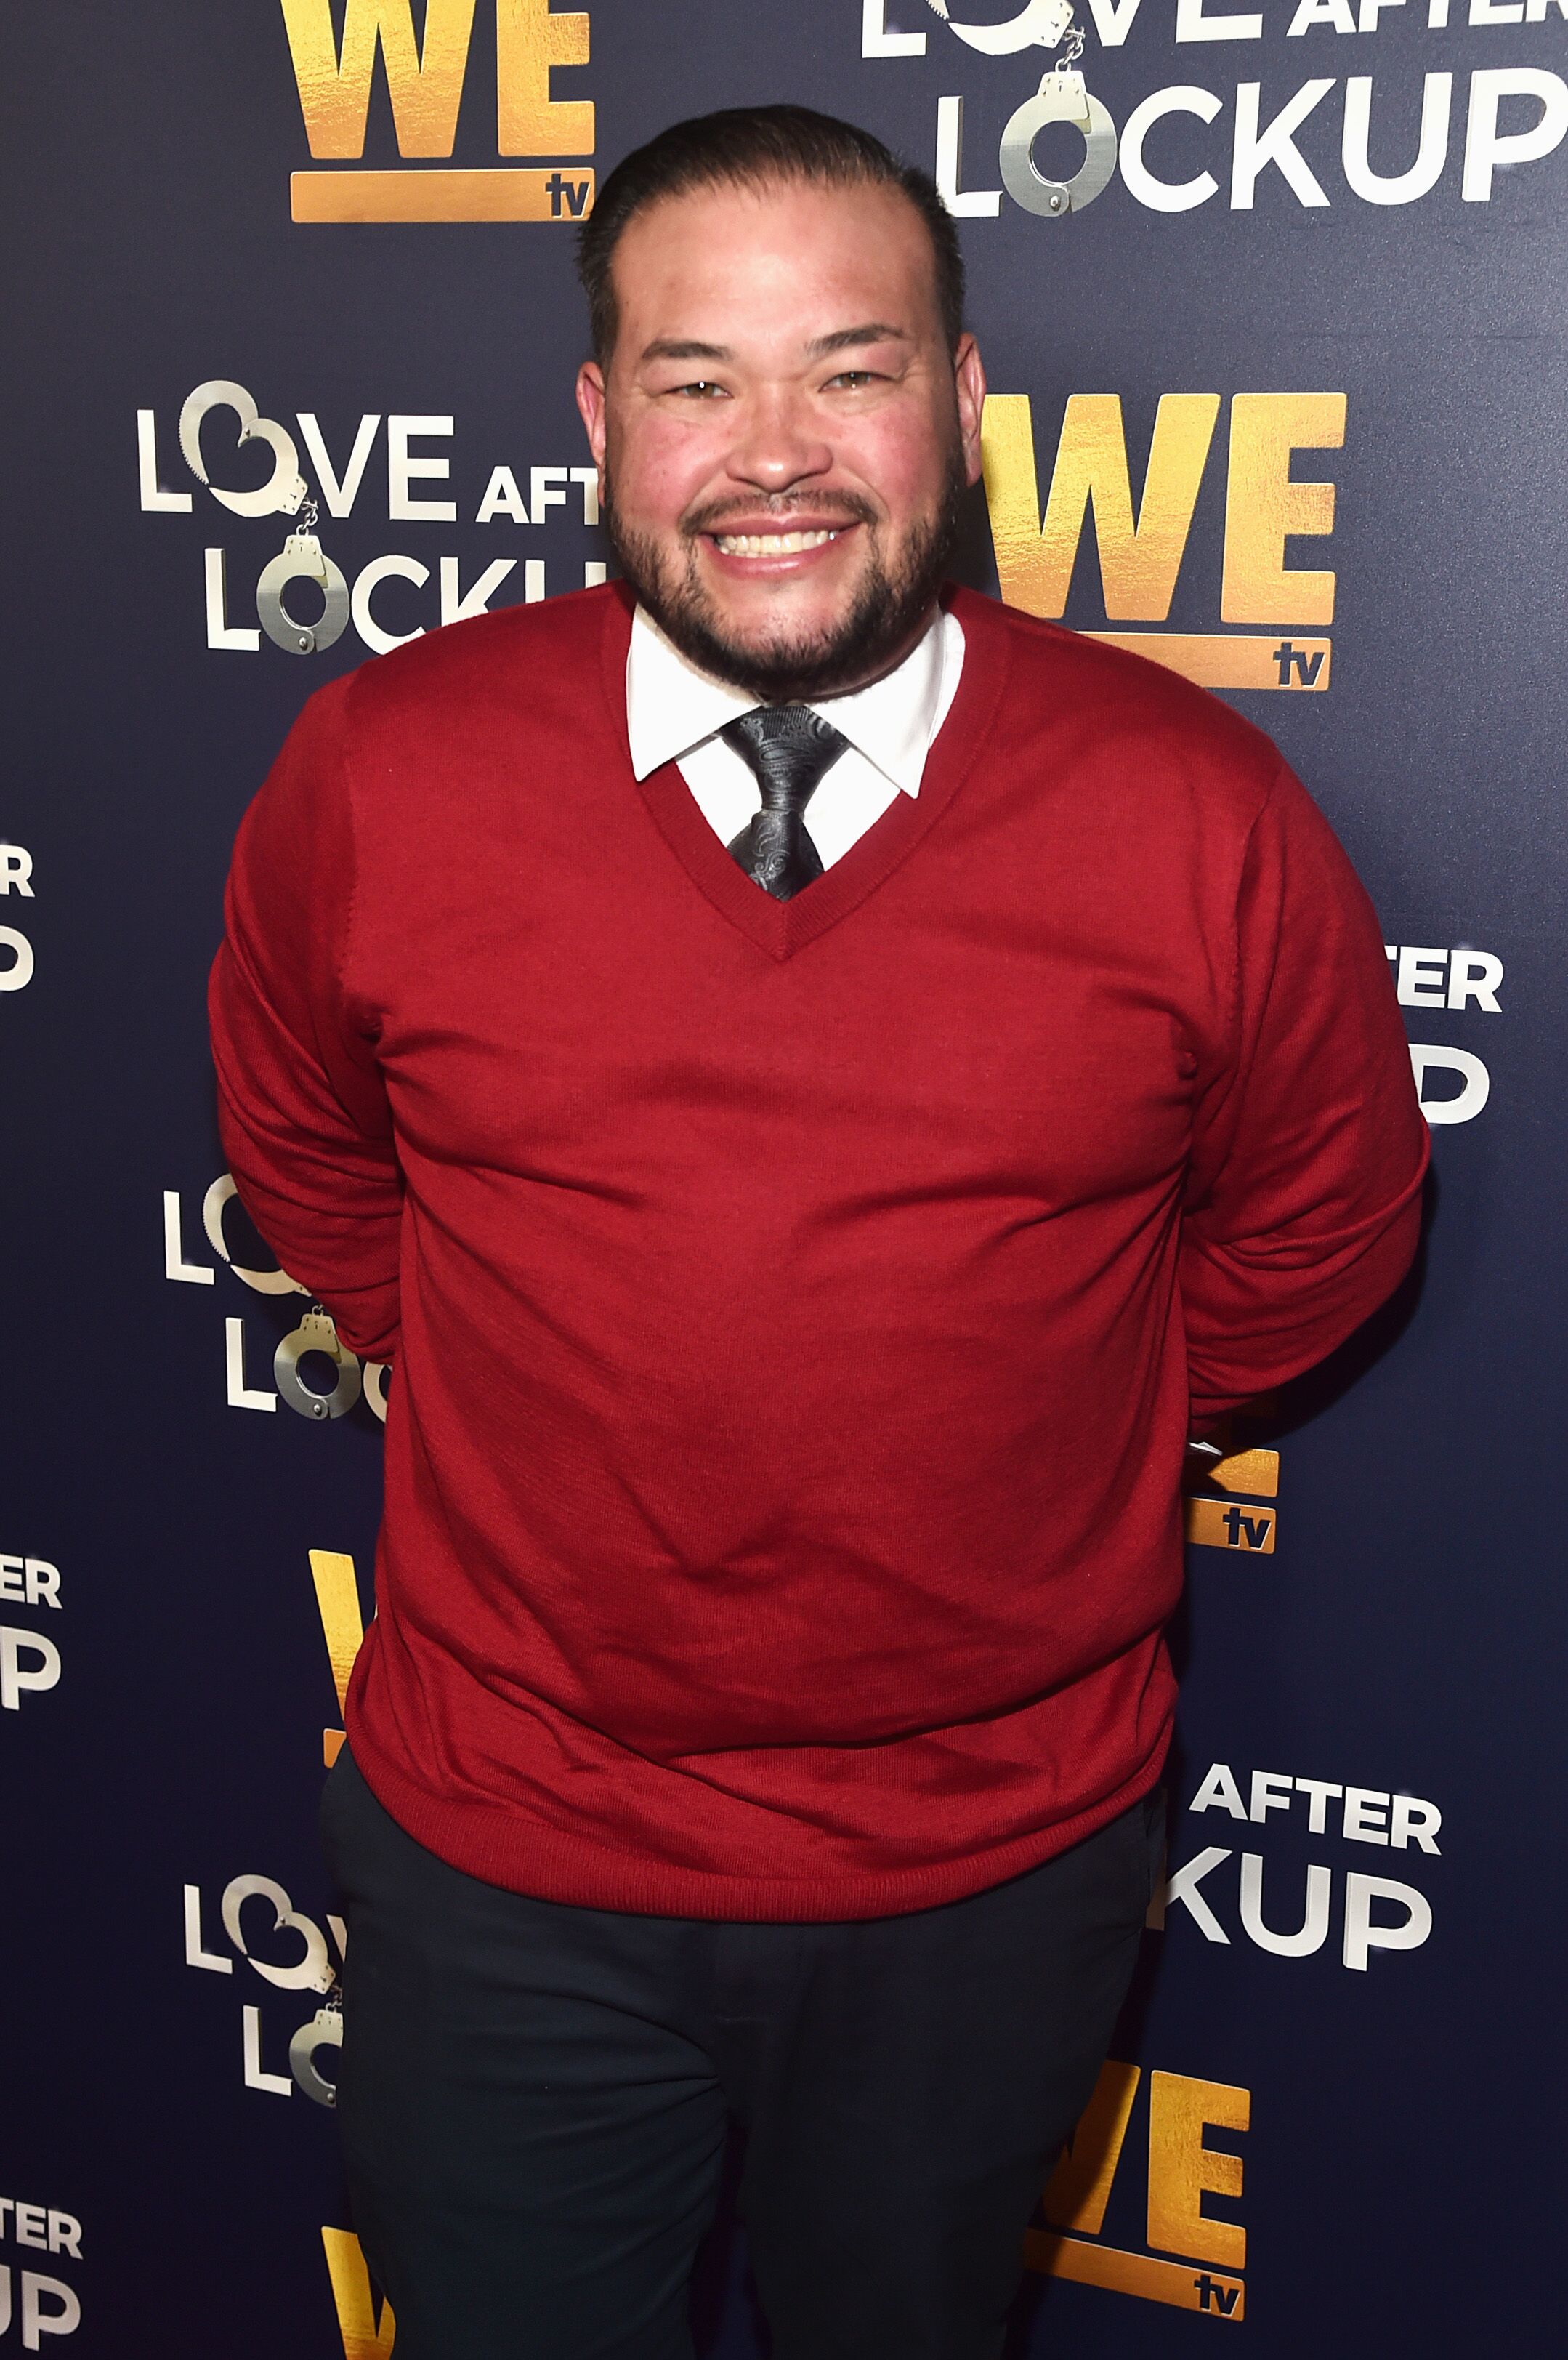 Jon Gosselin at WEtv on December 11, 2018, in Beverly Hills, California | Photo: Getty Images